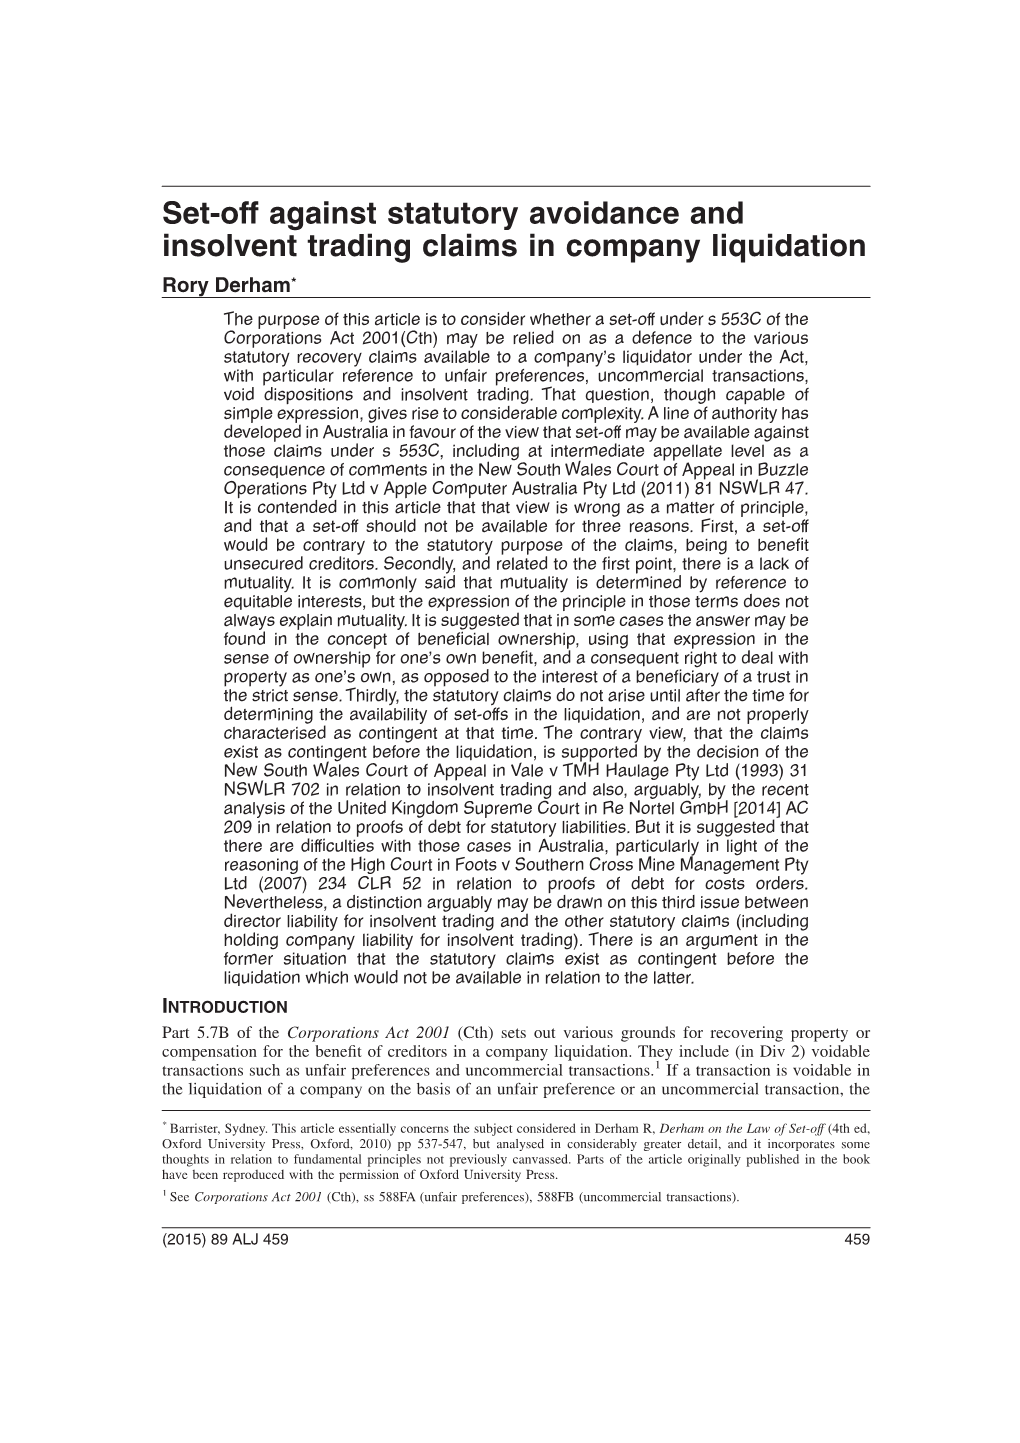 Set-Off Against Statutory Avoidance and Insolvent Trading Claims In